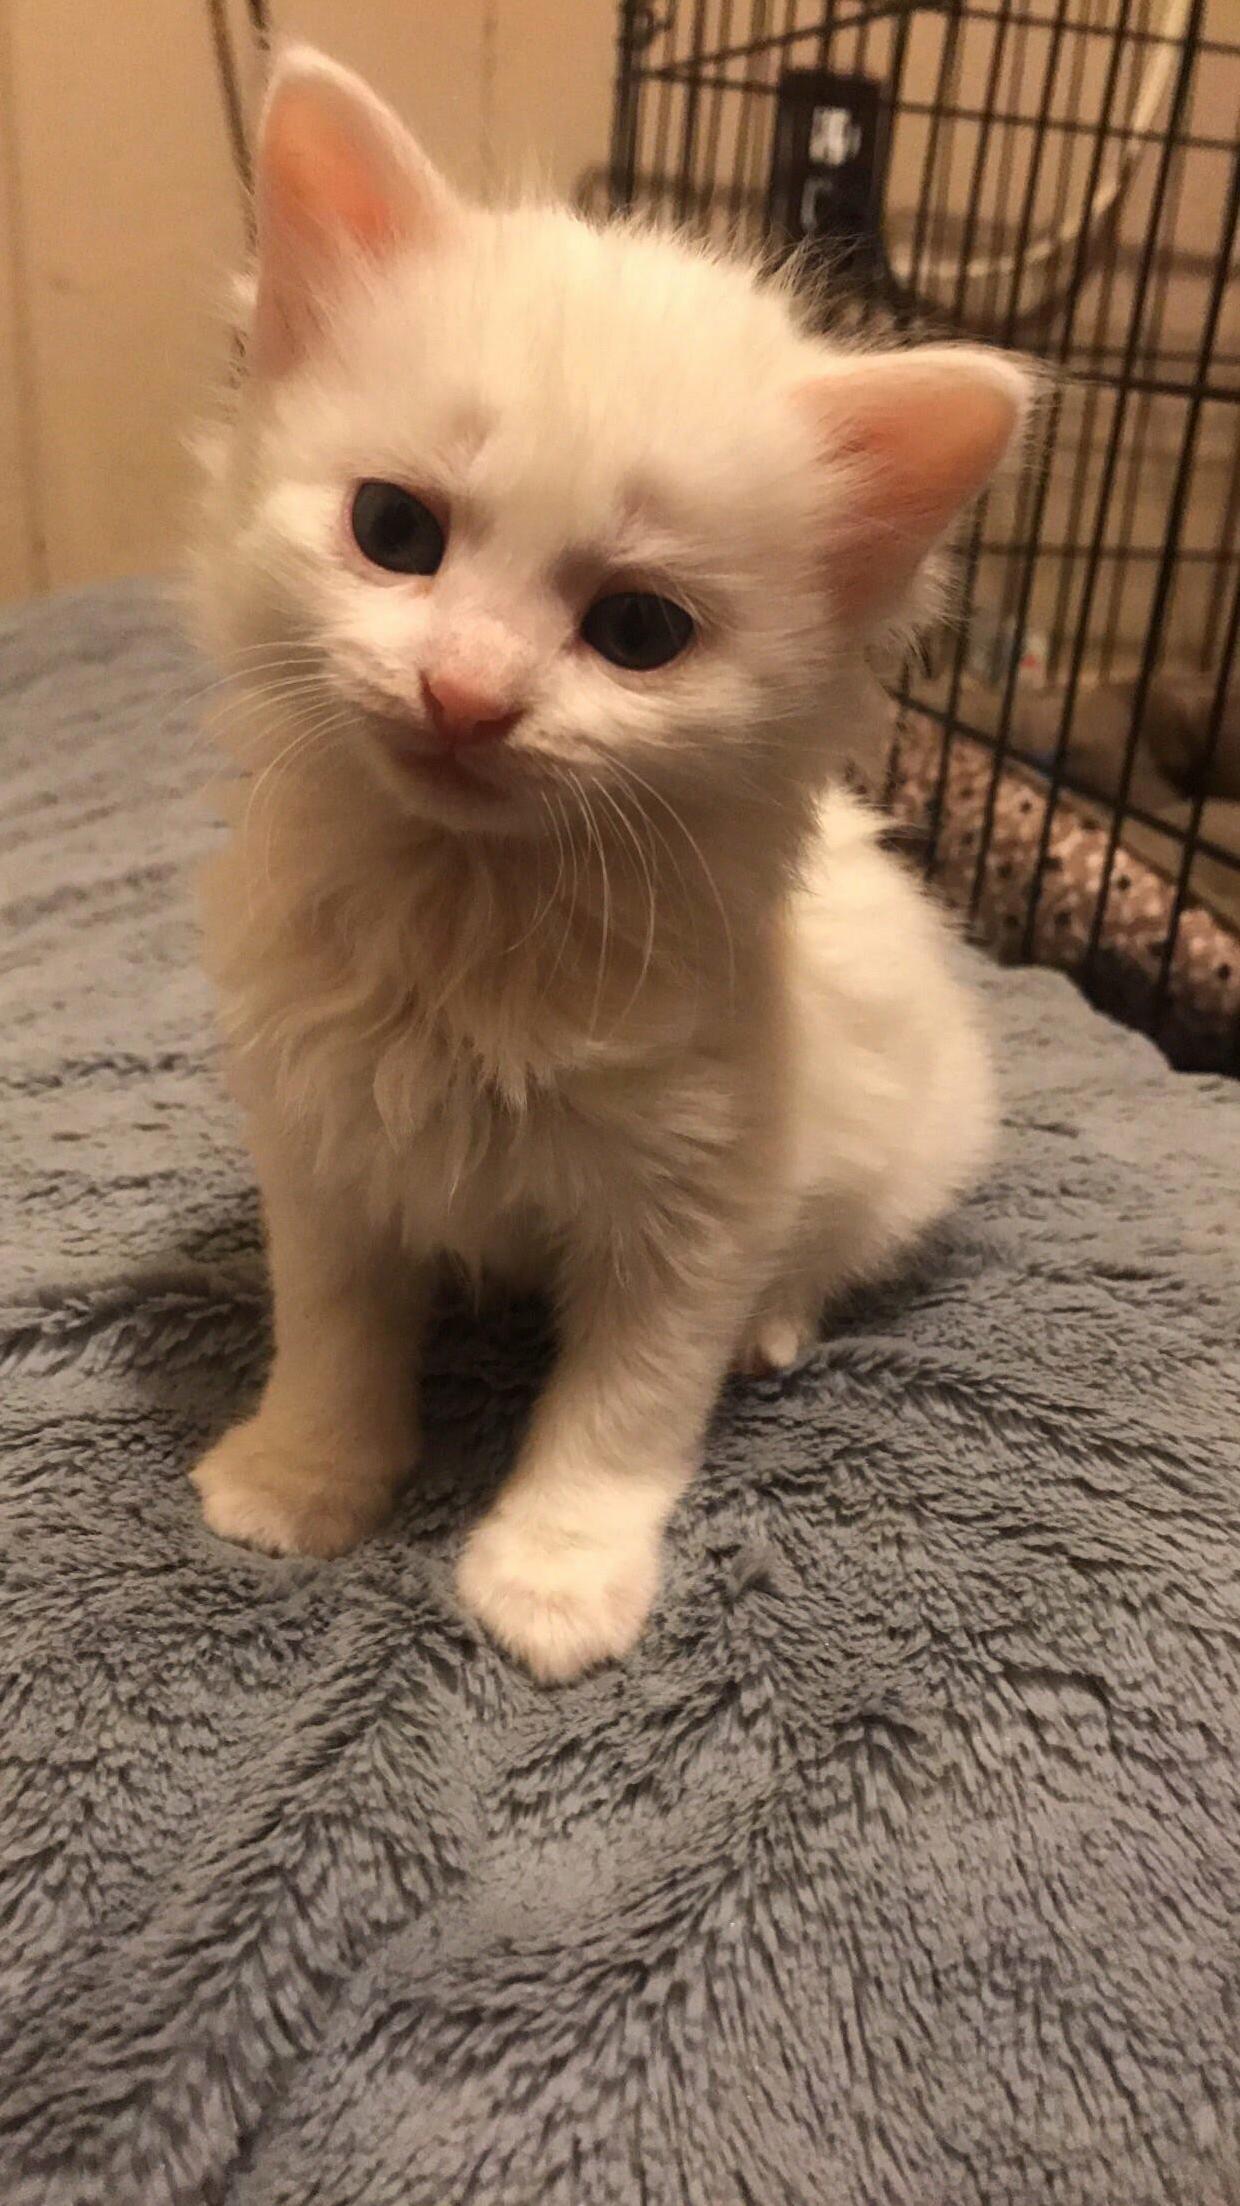 One of the sweet foster kittens i got to help for a few weeks